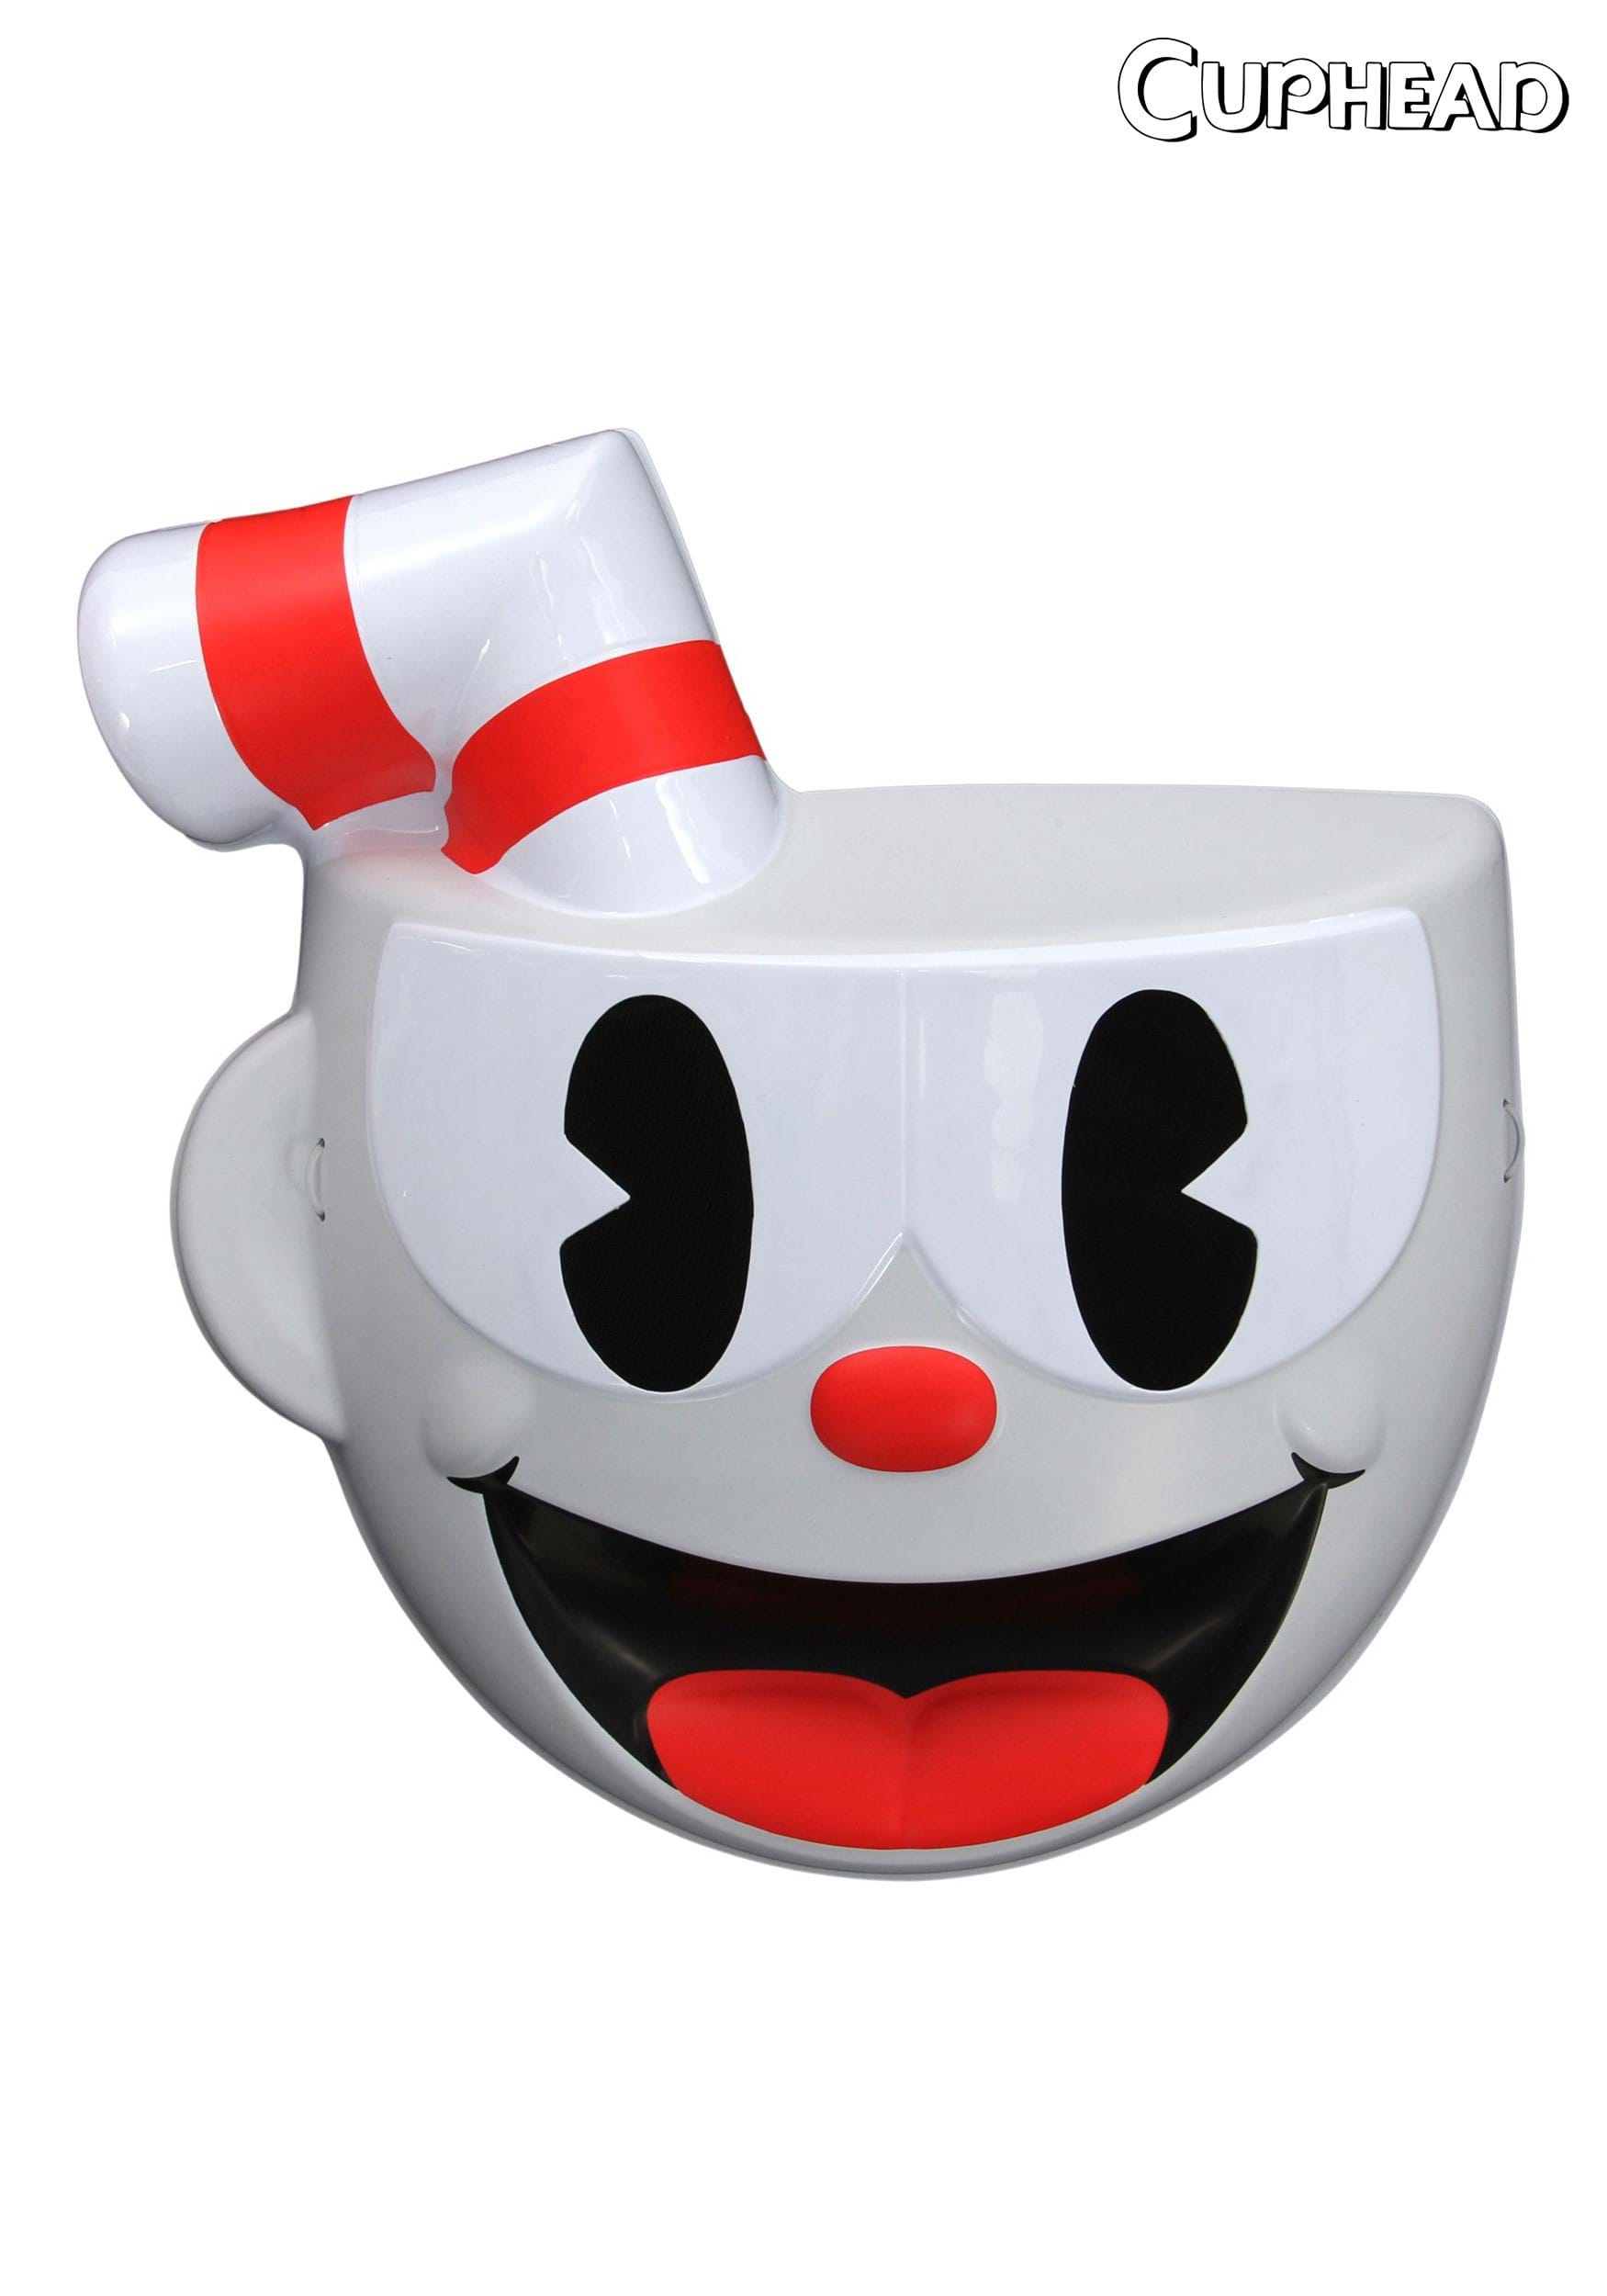 Cuphead King Dice Costume Vacuform Mask for Adults and Kids